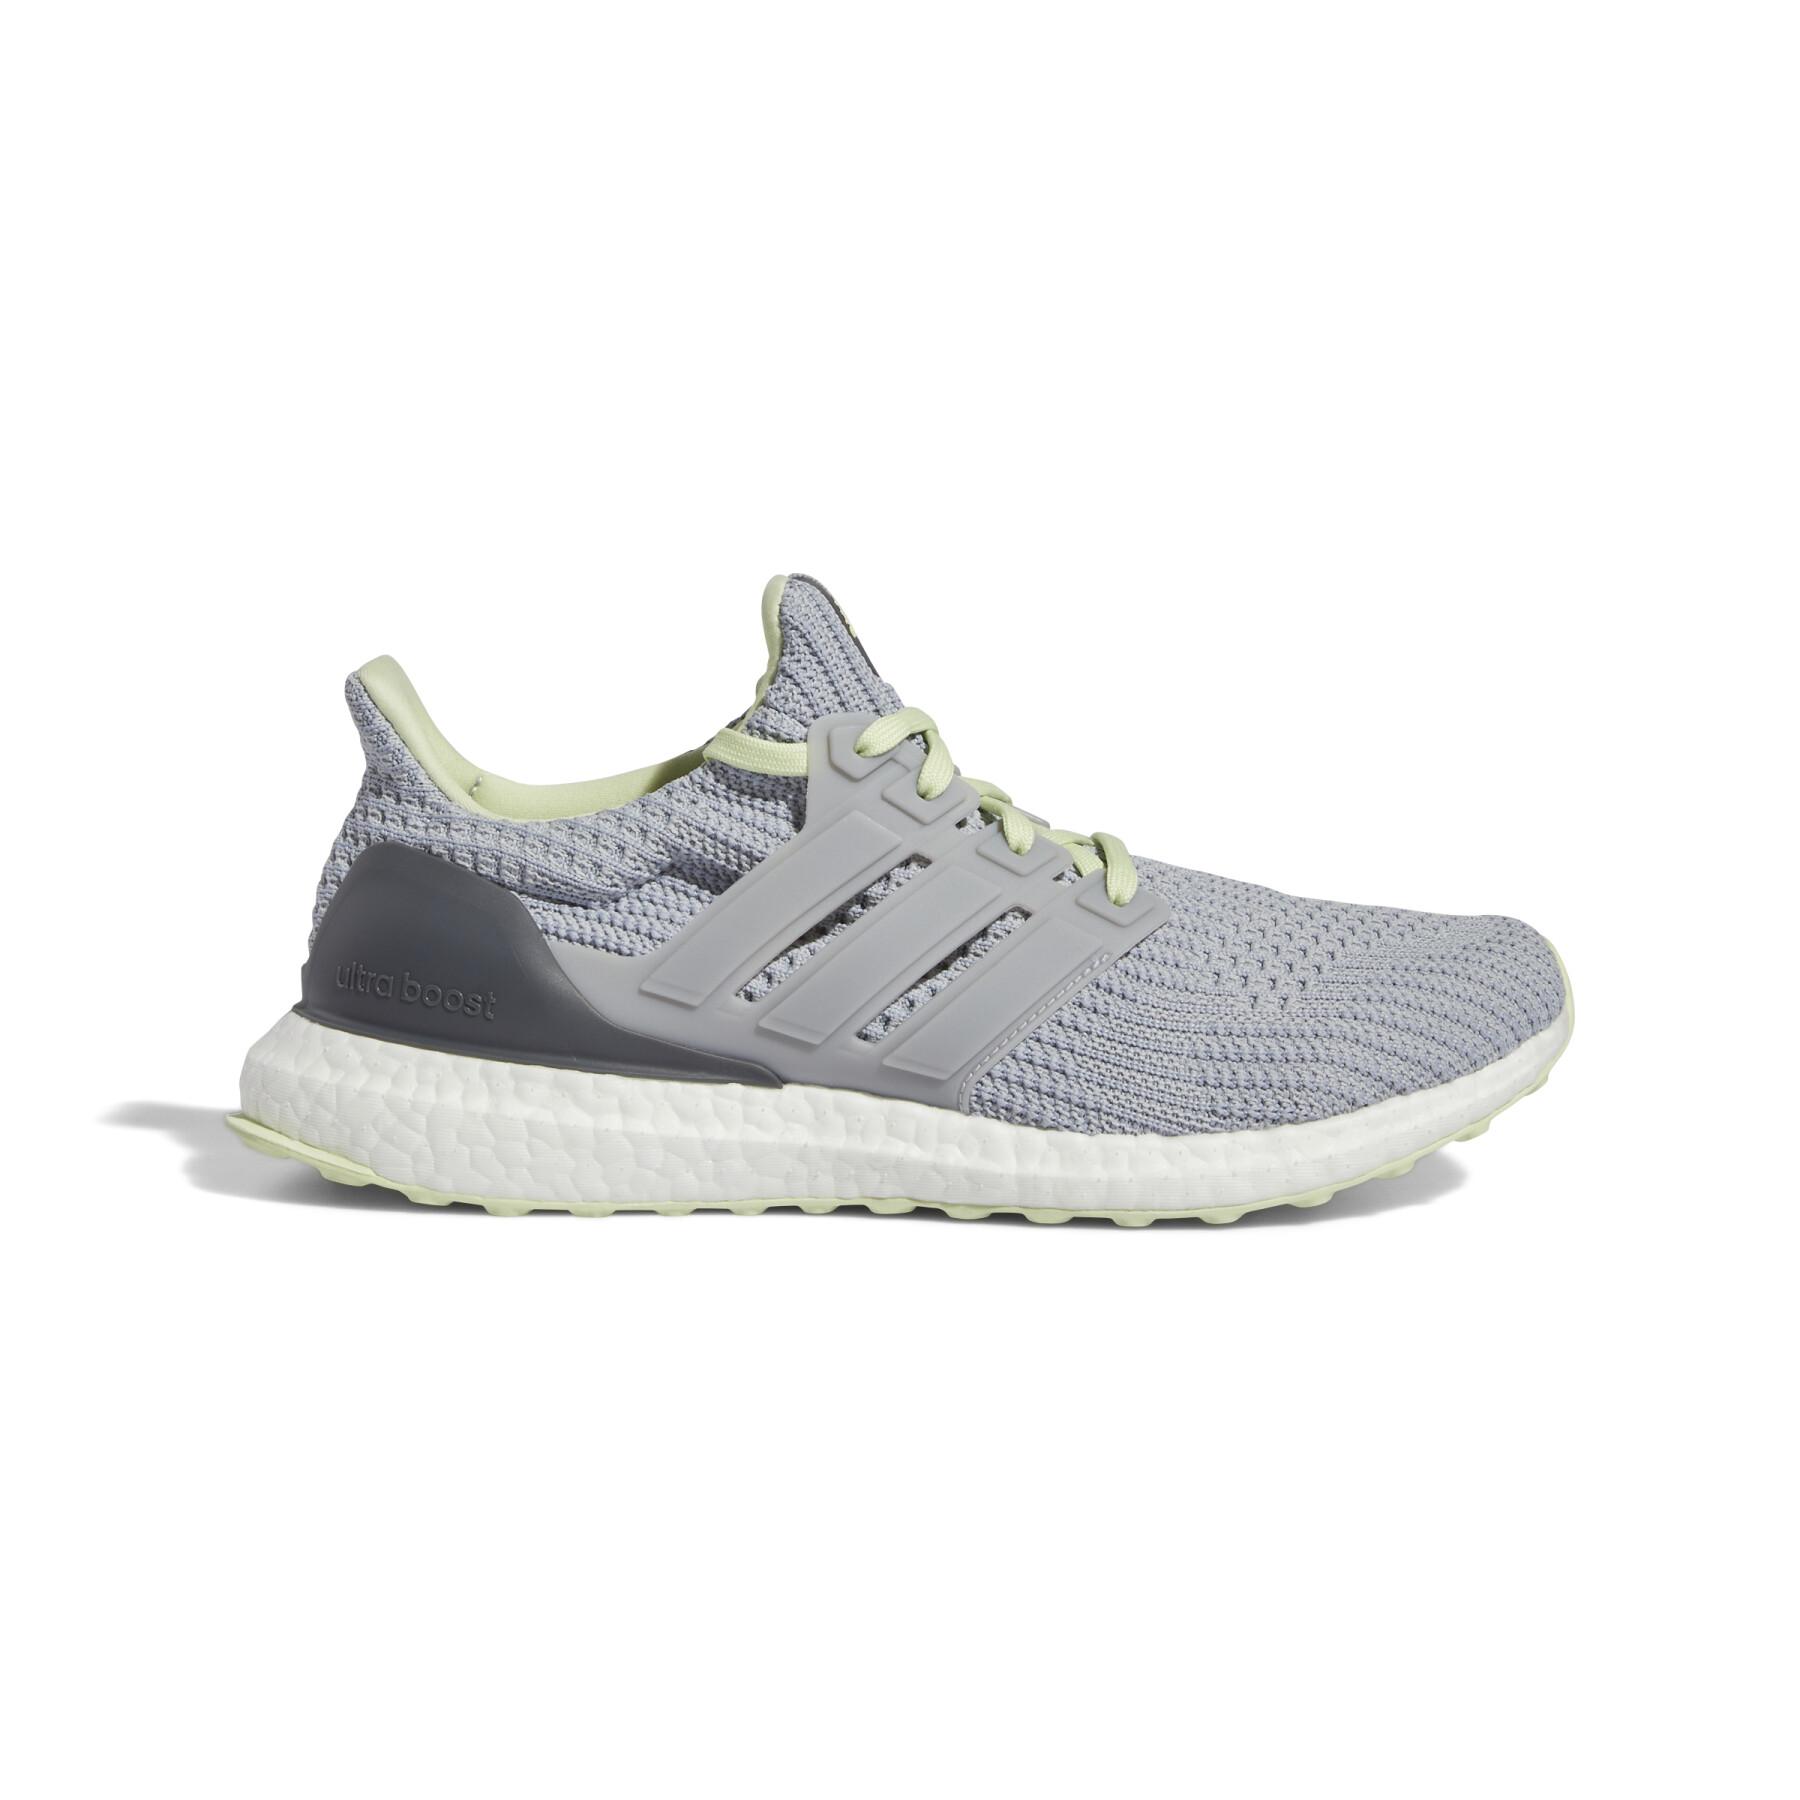 Trainers adidas Ultraboost 4.0 Dna